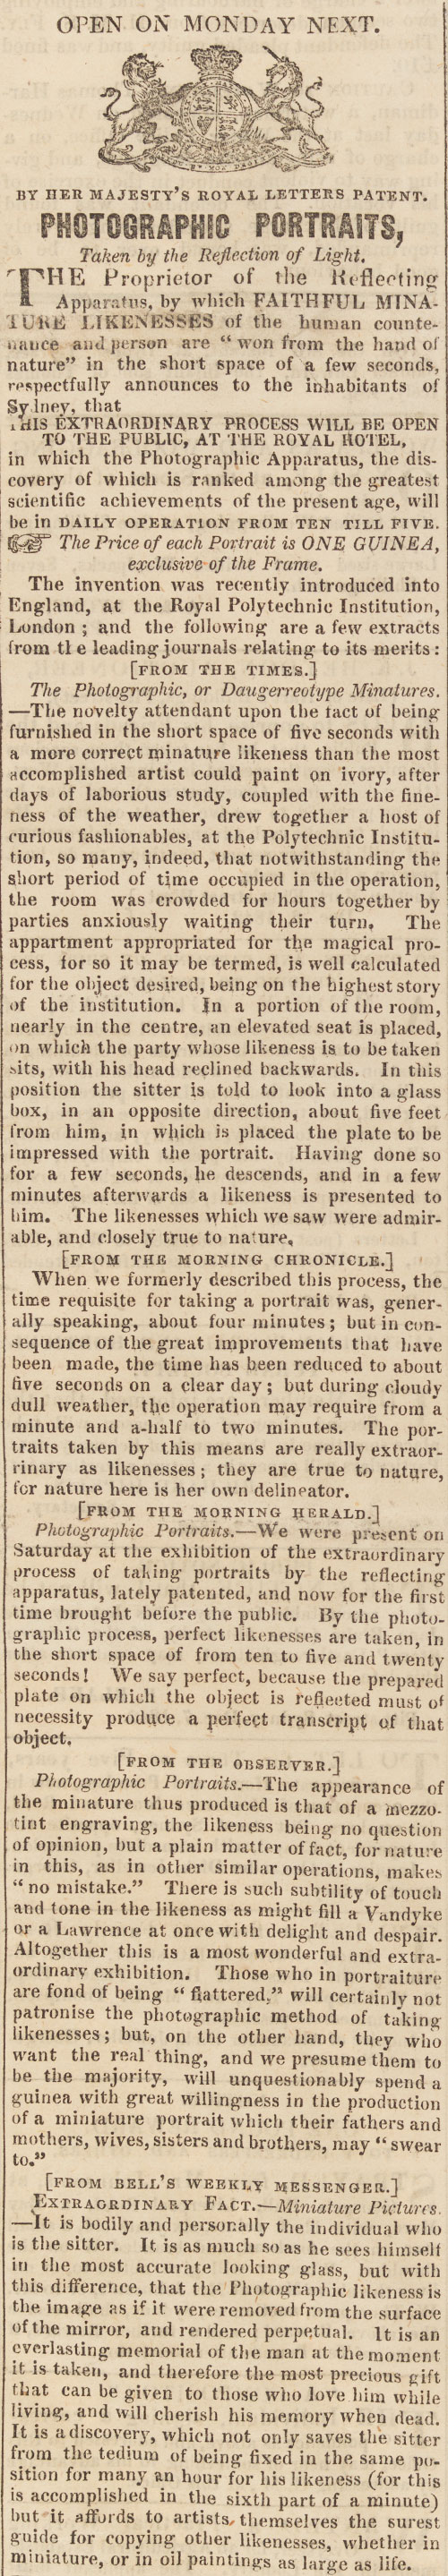 Advertisement, 'Photographic Portraits, Taken by the Reflection of Light', The Australian, 9 December 1842, p.1.	